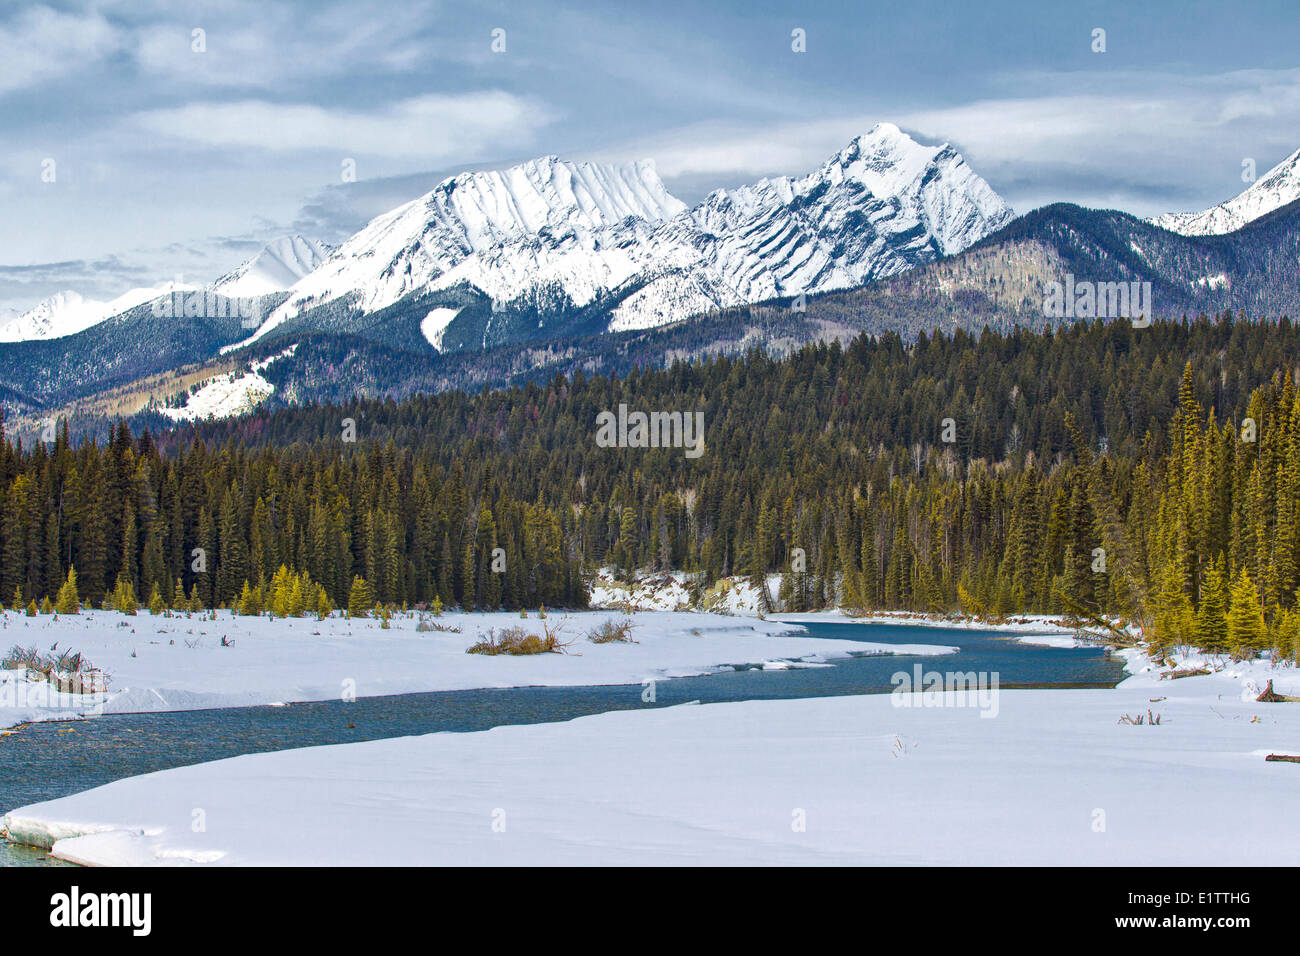 Snow Covered Mountains, Sinclair Pass, Kootney National Park, British Columbia, Canada Stock Photo